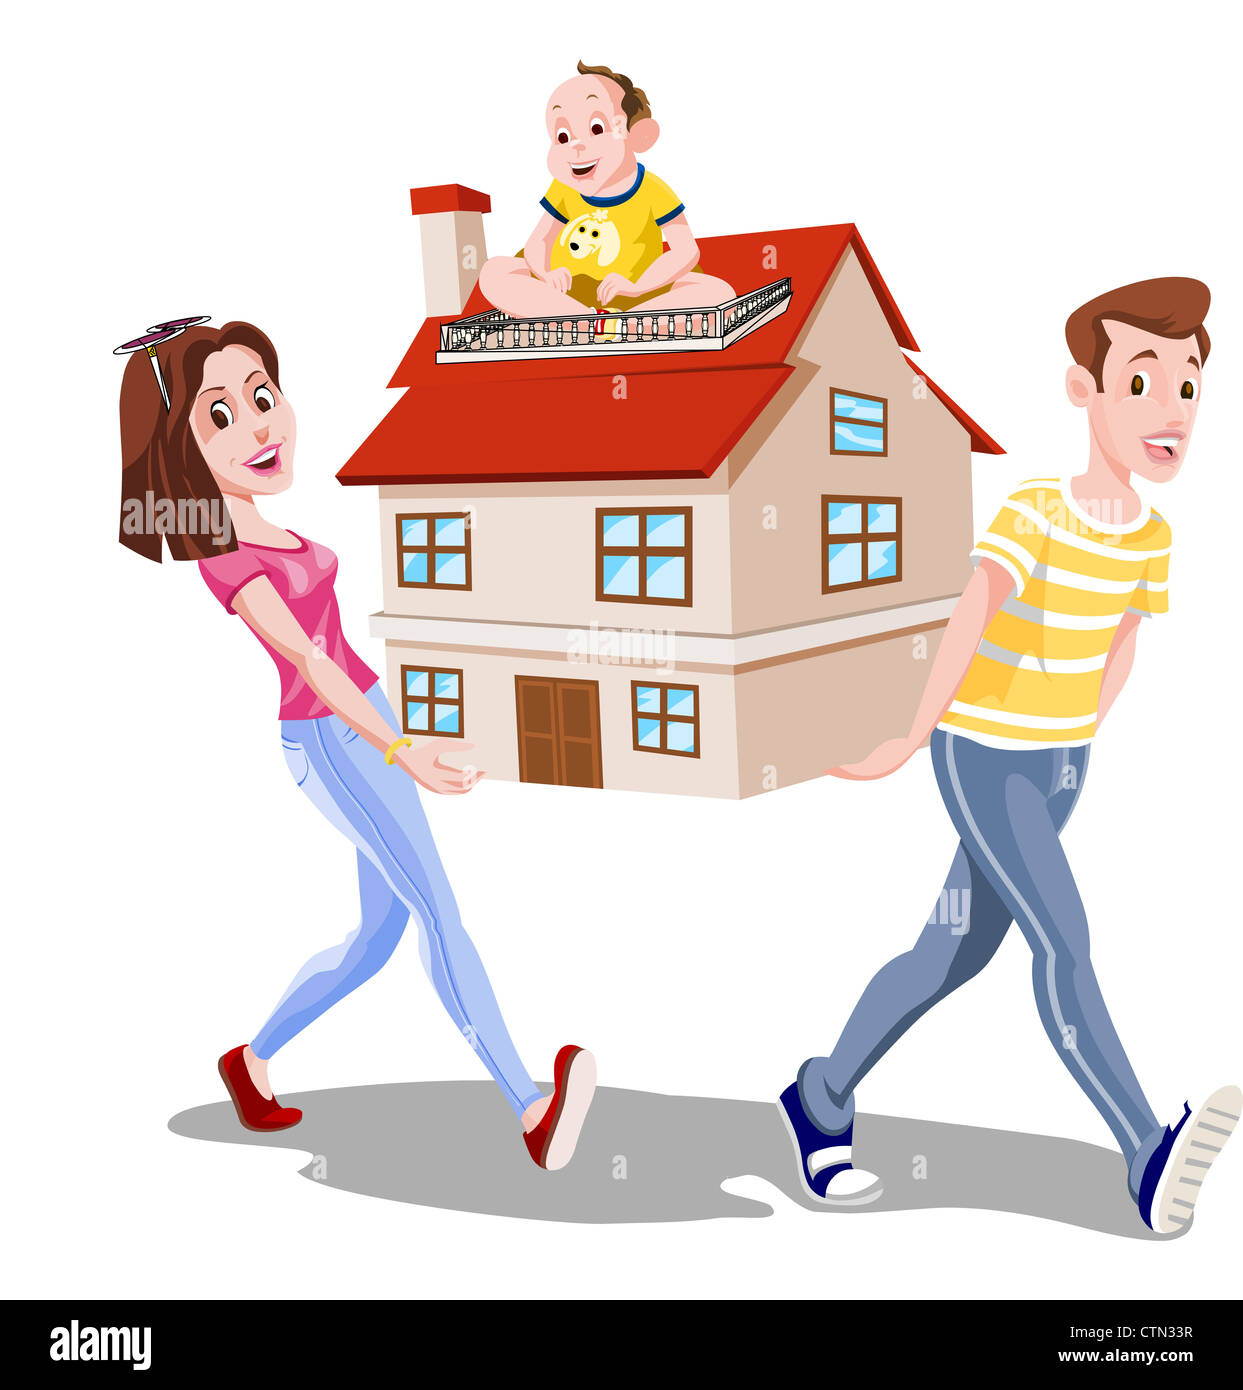 Family Carrying a House, Mom, Dad, Baby, vector illustration Stock Photo